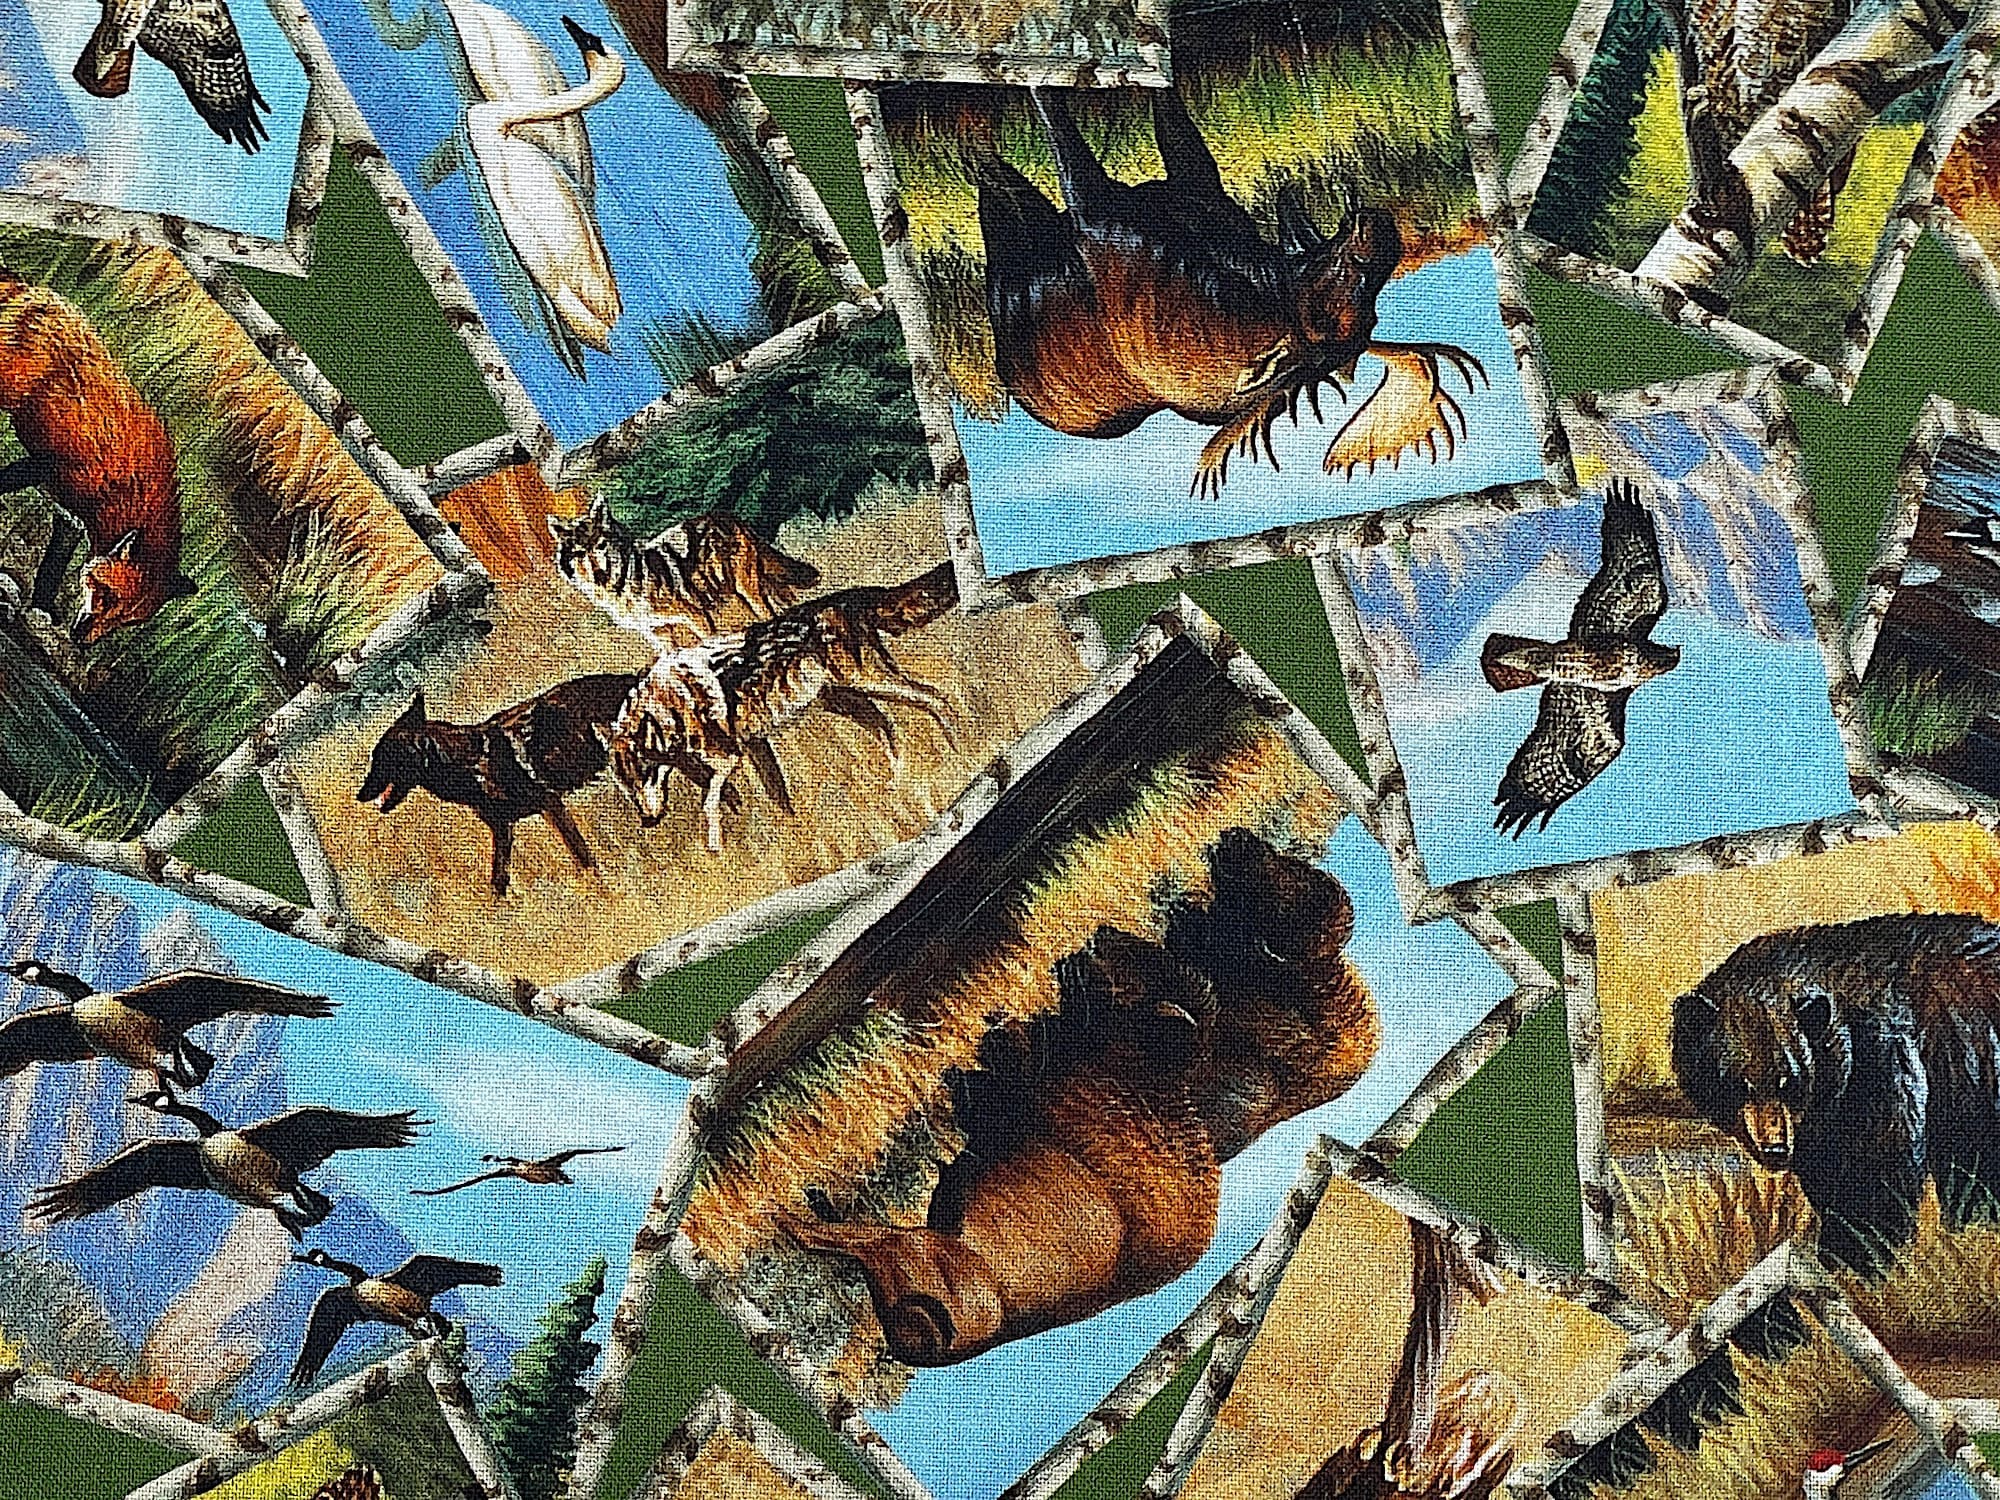 This cotton fabric is covered with wildlife that are in wood frames. The frames look like small branches and deer, buffalo, fox, swans, ducks, birds are inside of the frames. This fabric is part of the Great Plains collection by QT fabrics.